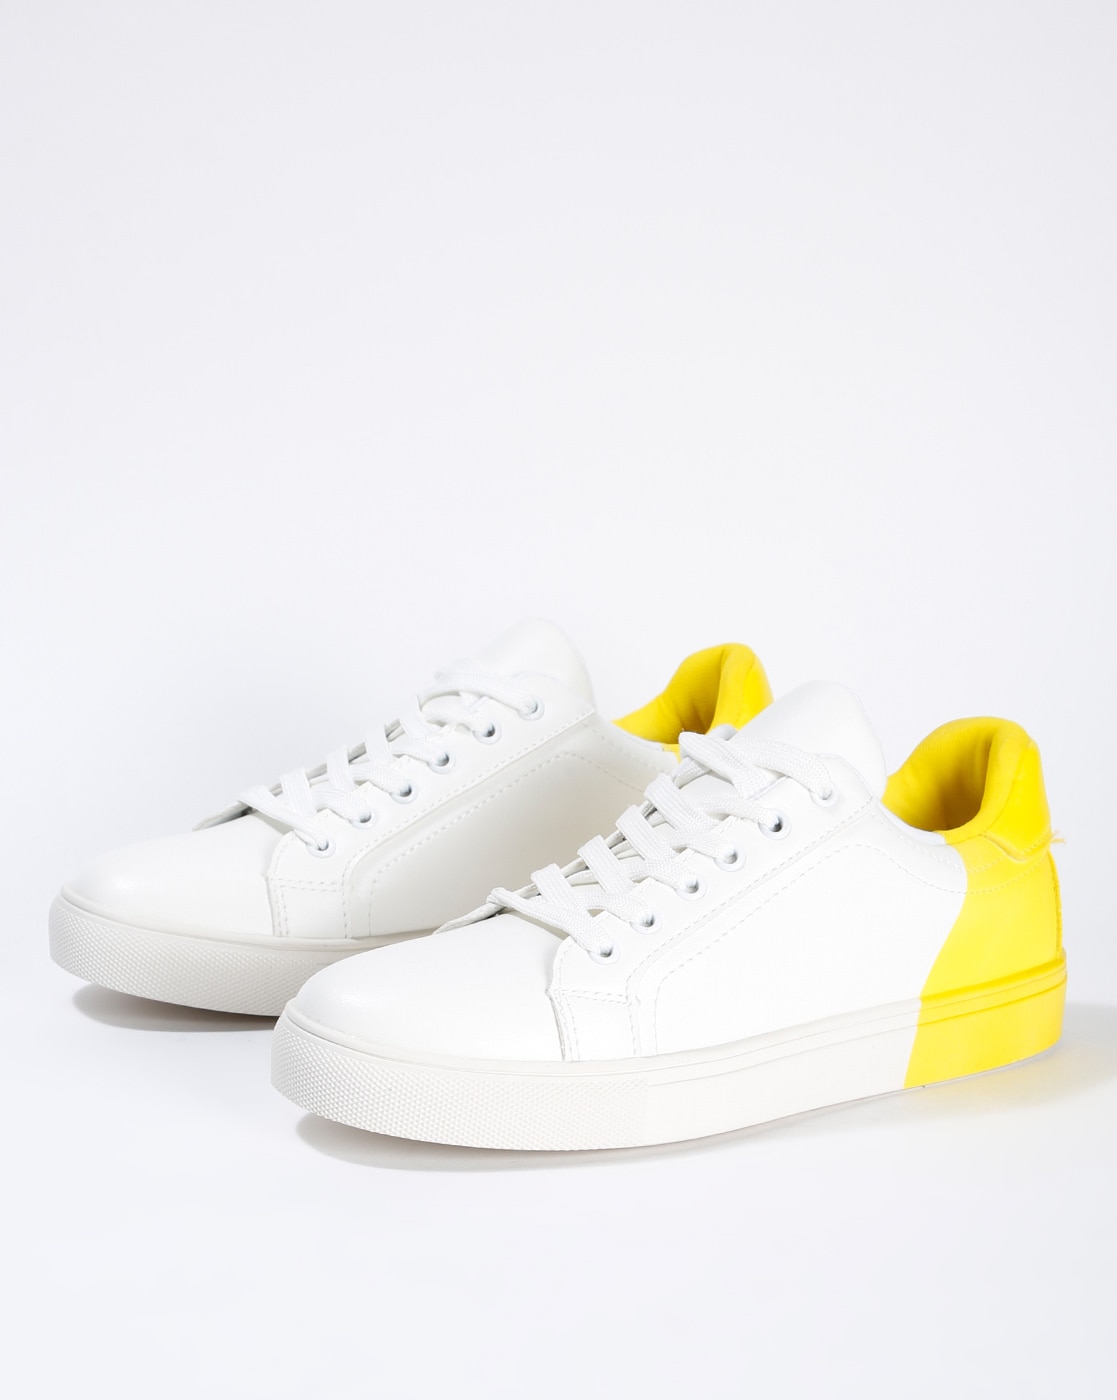 yellow on white shoes